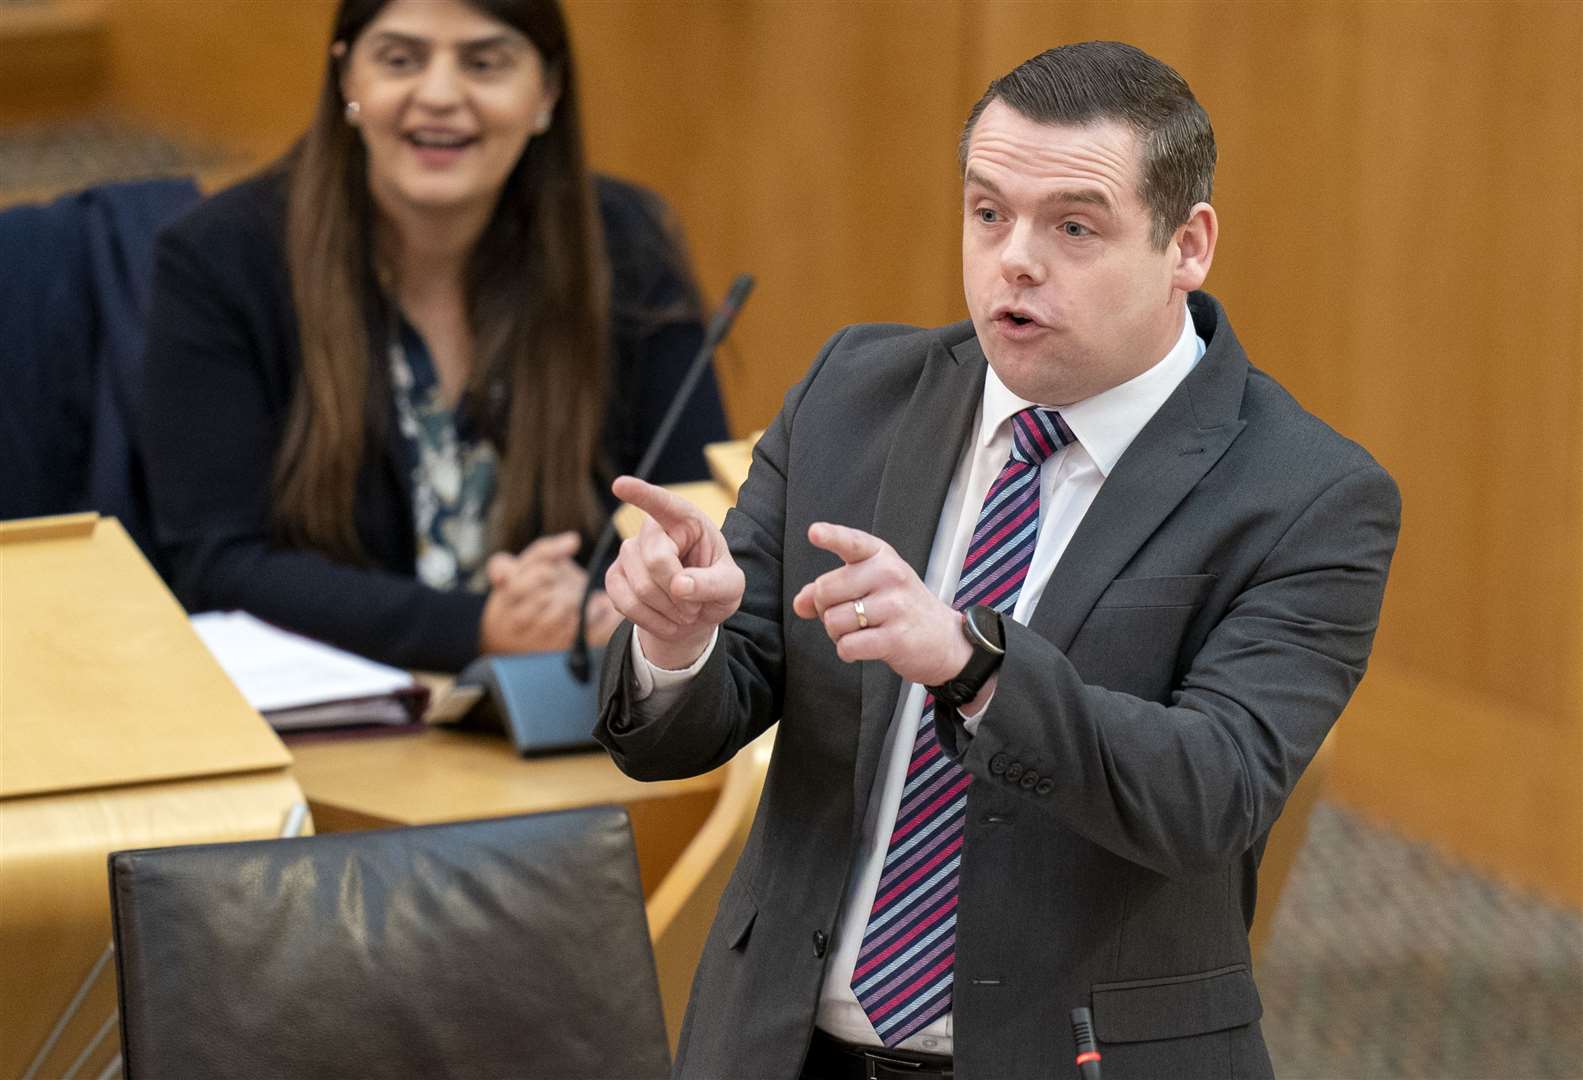 Scottish Conservative leader Douglas Ross challenged Mr Yousaf on the make-up of his Government (Jane Barlow/PA)